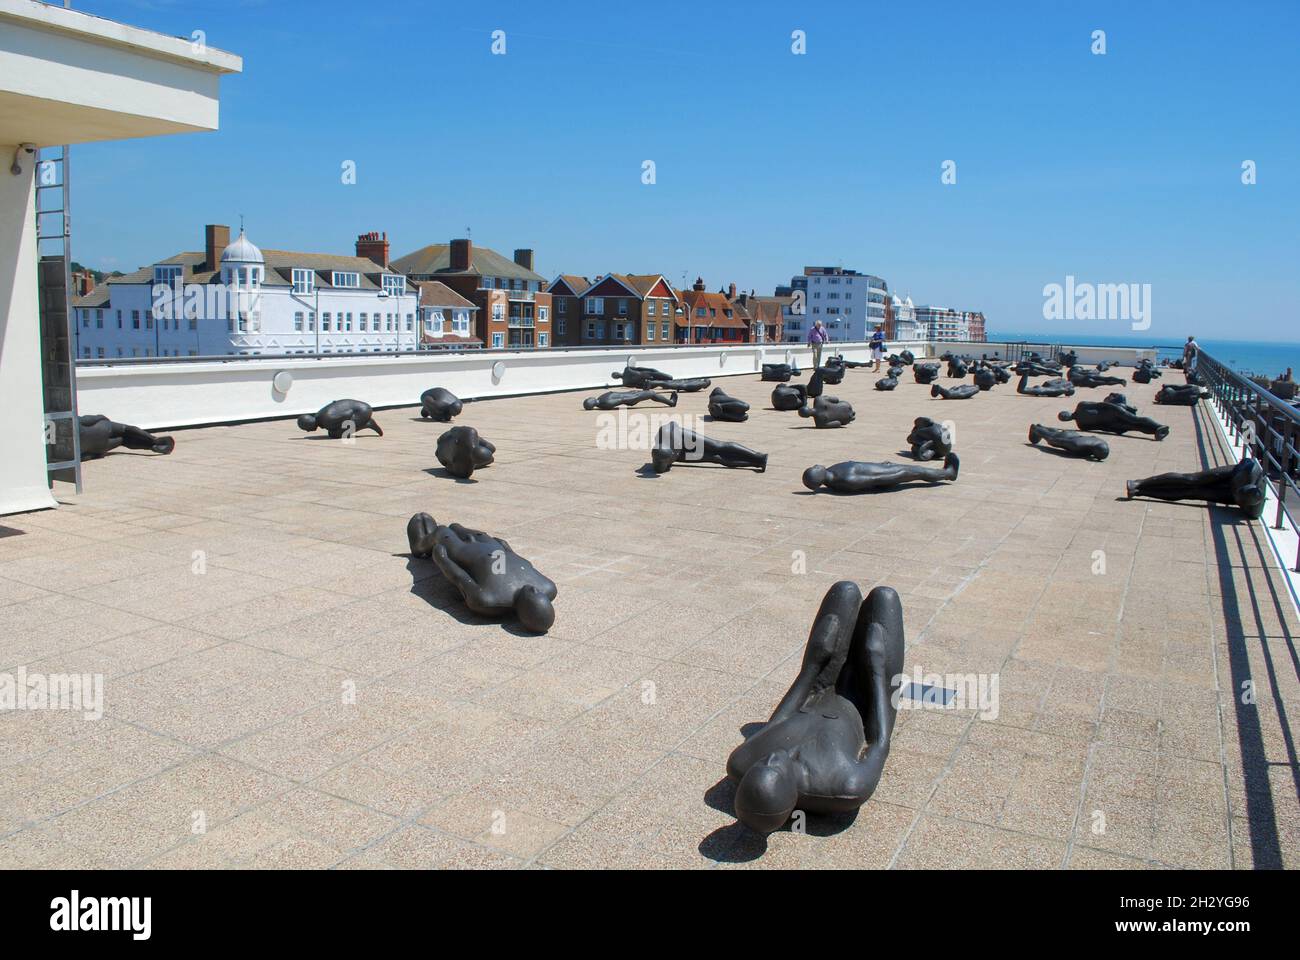 Antony Gormley's 'Critical Mass' installation on the roof of the magnificent Art Deco De La Warr Pavilion in Bexhill On Sea Stock Photo